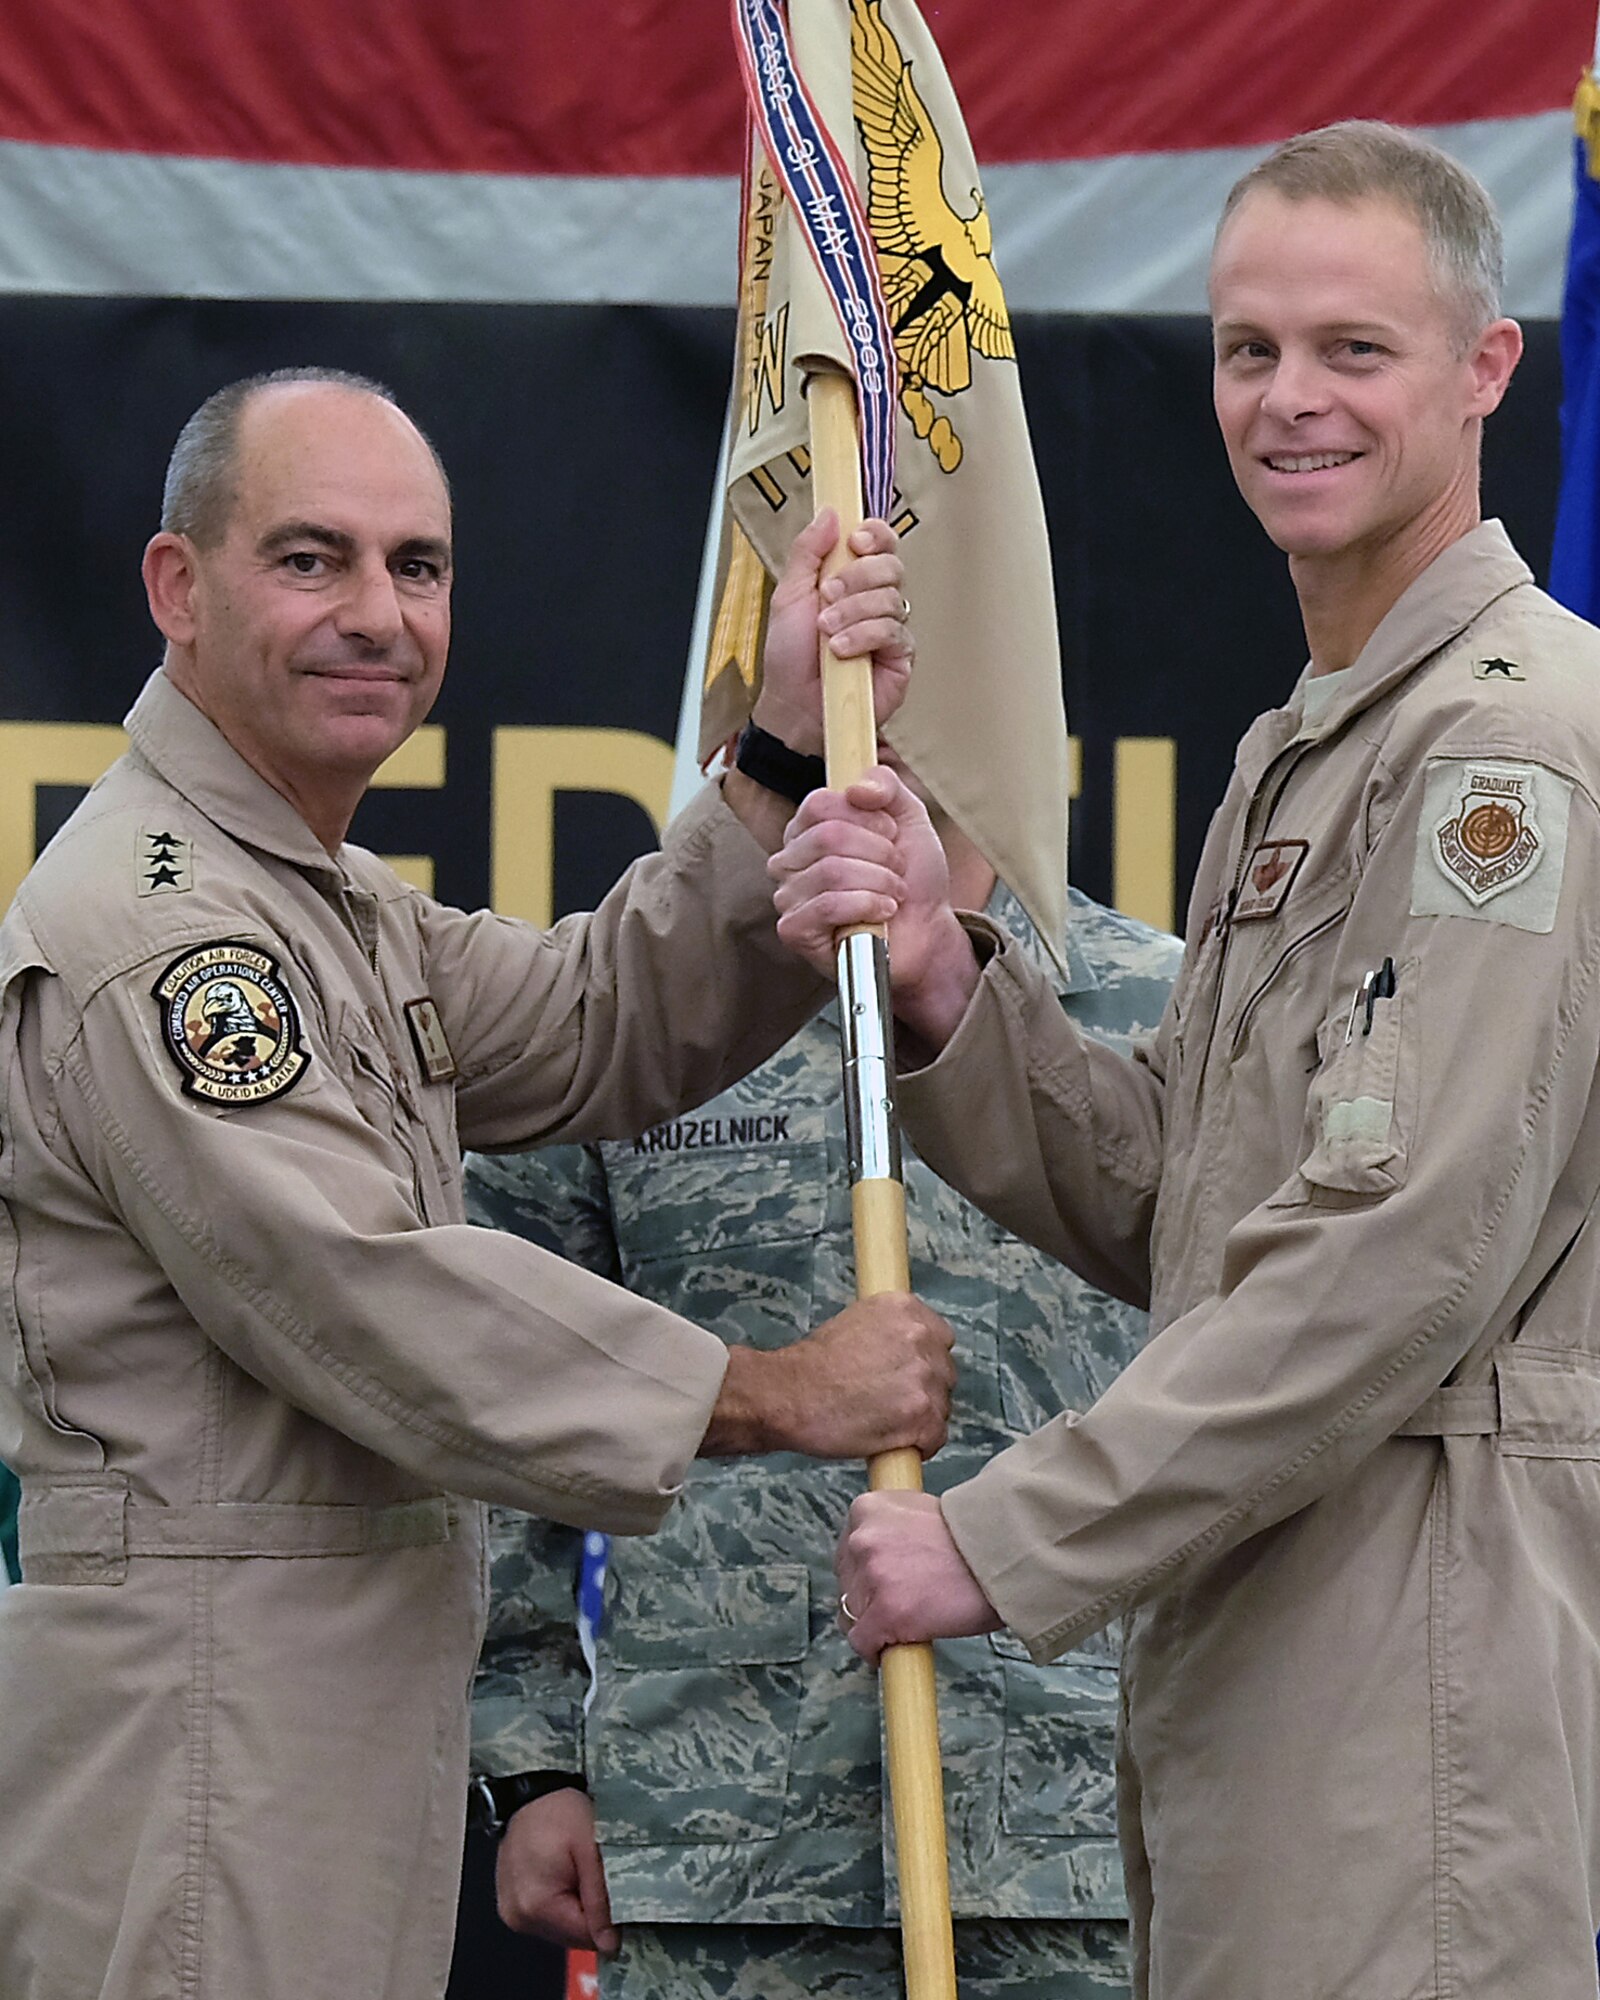 From right, Brig. Gen. Charles S. Corcoran, outgoing 380th Air Expeditionary commander, passes the 380 AEW guidon to Lt. Gen. Jeffrey L. Harrigian, U.S. Air Forces Central Command commander, during a change of command ceremony July 1, 2017, at an undisclosed location in southwest Asia. Change of command ceremonies, which afford troops an introduction to their new commander, date back to Frederick the Great of Prussia. (U.S. Air Force Photo by Senior Airman Preston Webb)